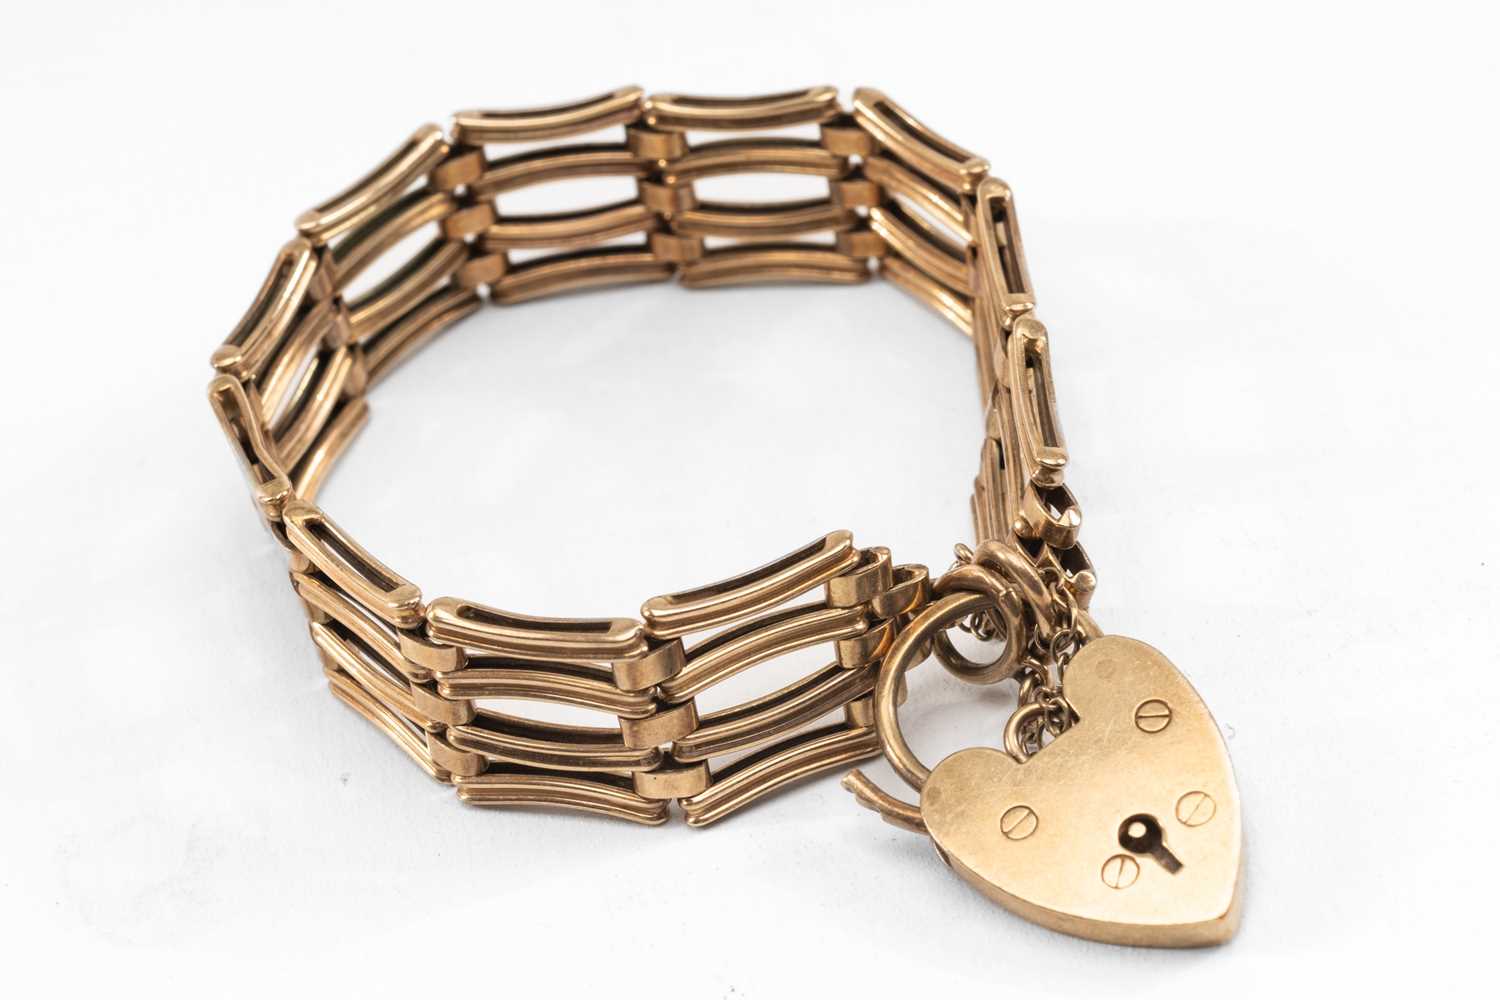 9CT GOLD GATELINK BRACELET, with grooved and bowed links, padlock clasp, wt. 20.6g approx.